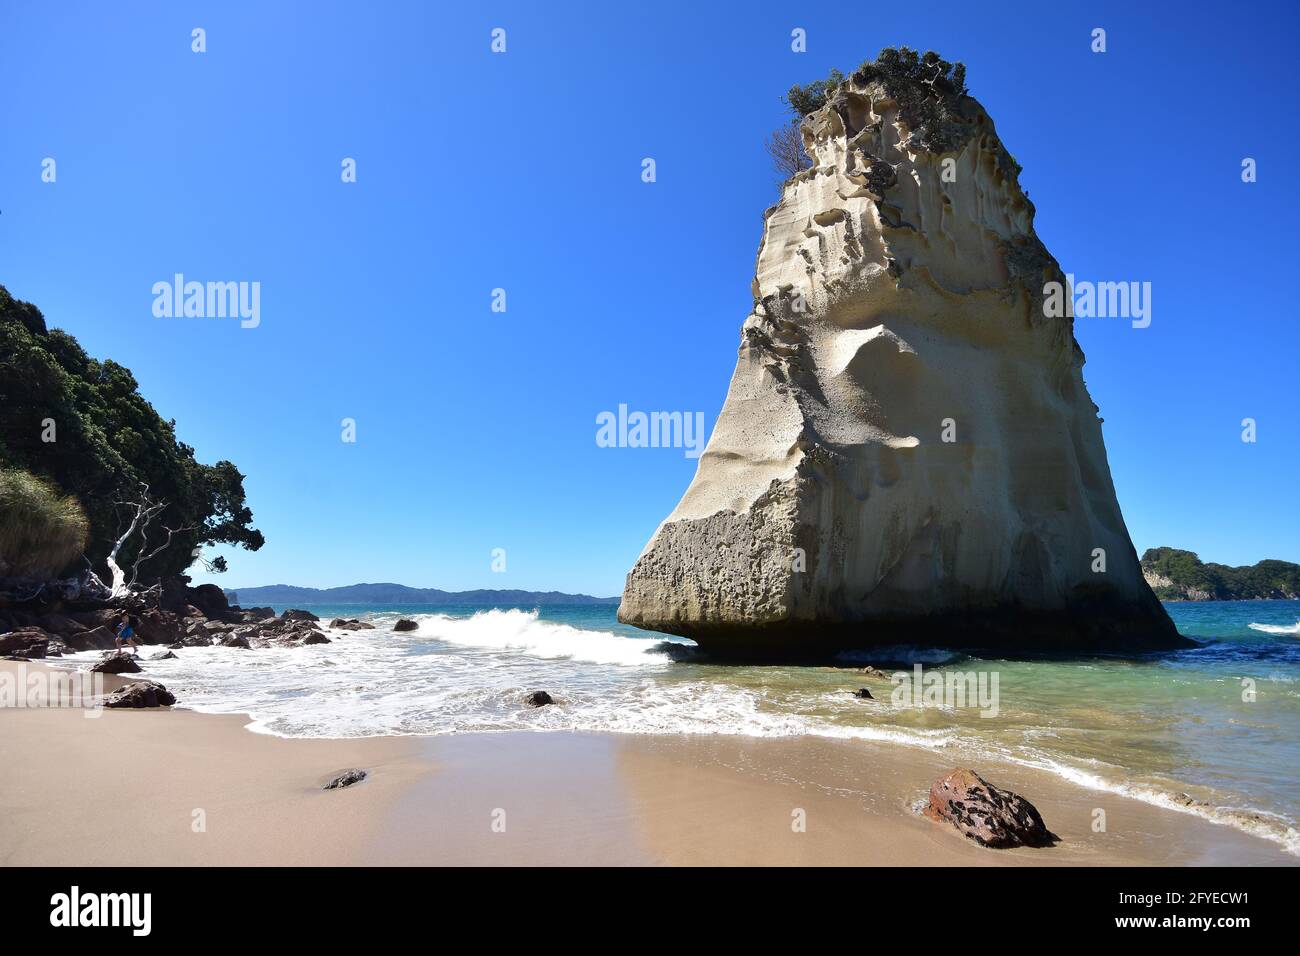 Massive block of rock in shallow water on sandy beach washed by oceanic surf. Stock Photo